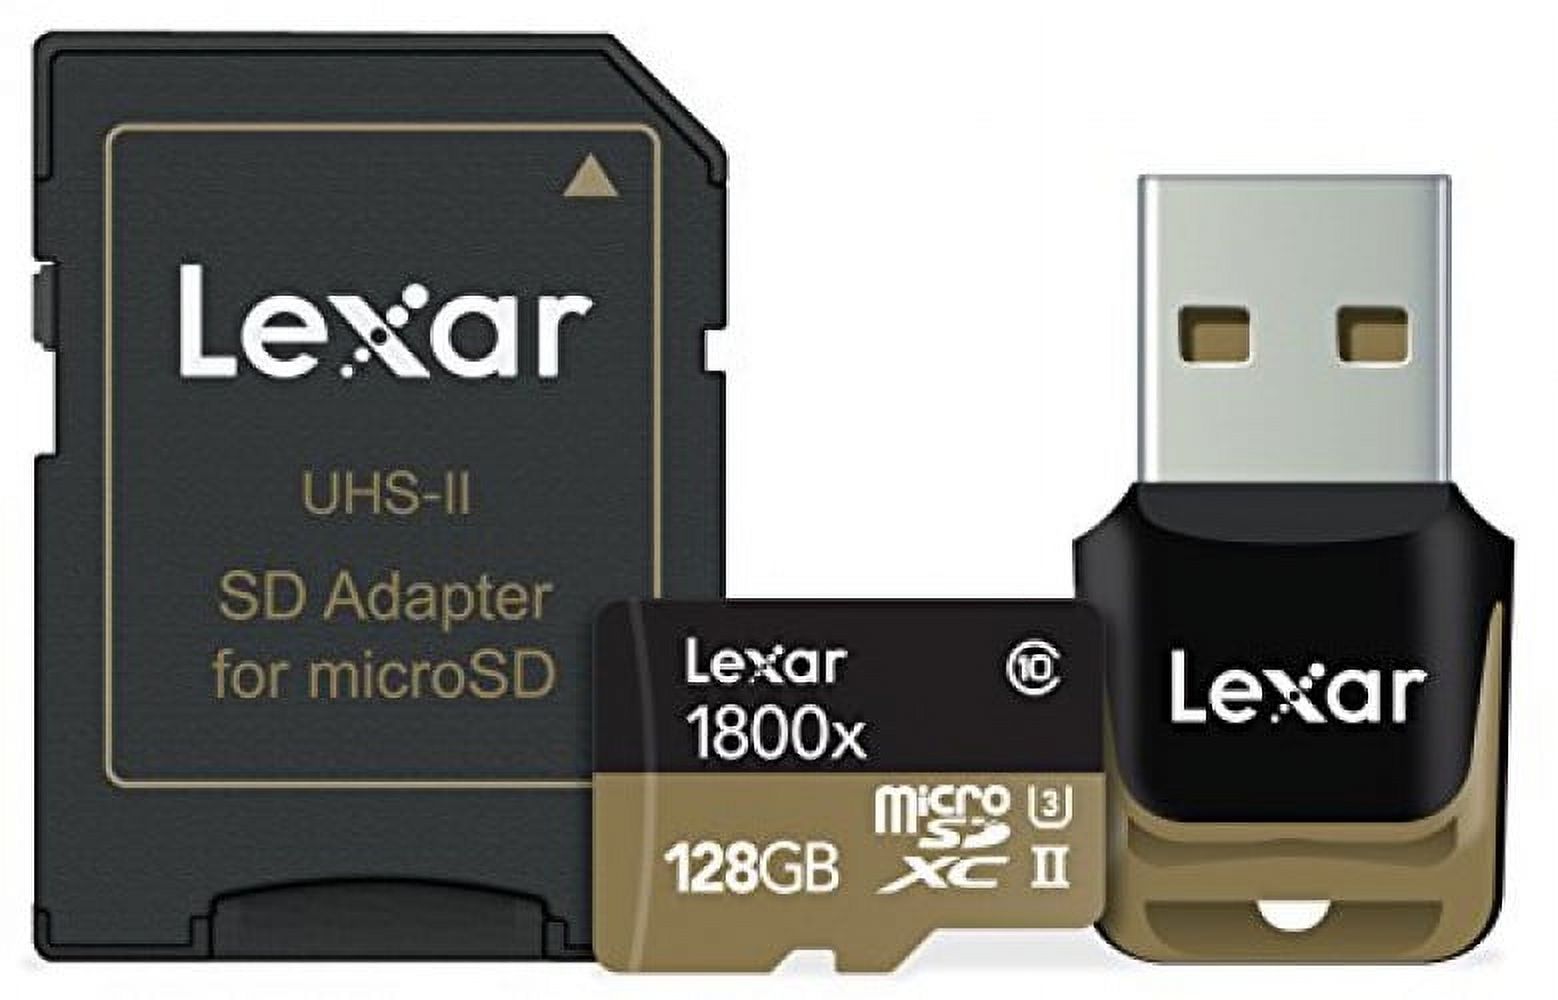 Lexar Professional - Flash memory card (microSDXC to SD adapter included) - 128 GB - UHS Class 3 / Class10 - 1800x - microSDXC UHS-II - image 2 of 6